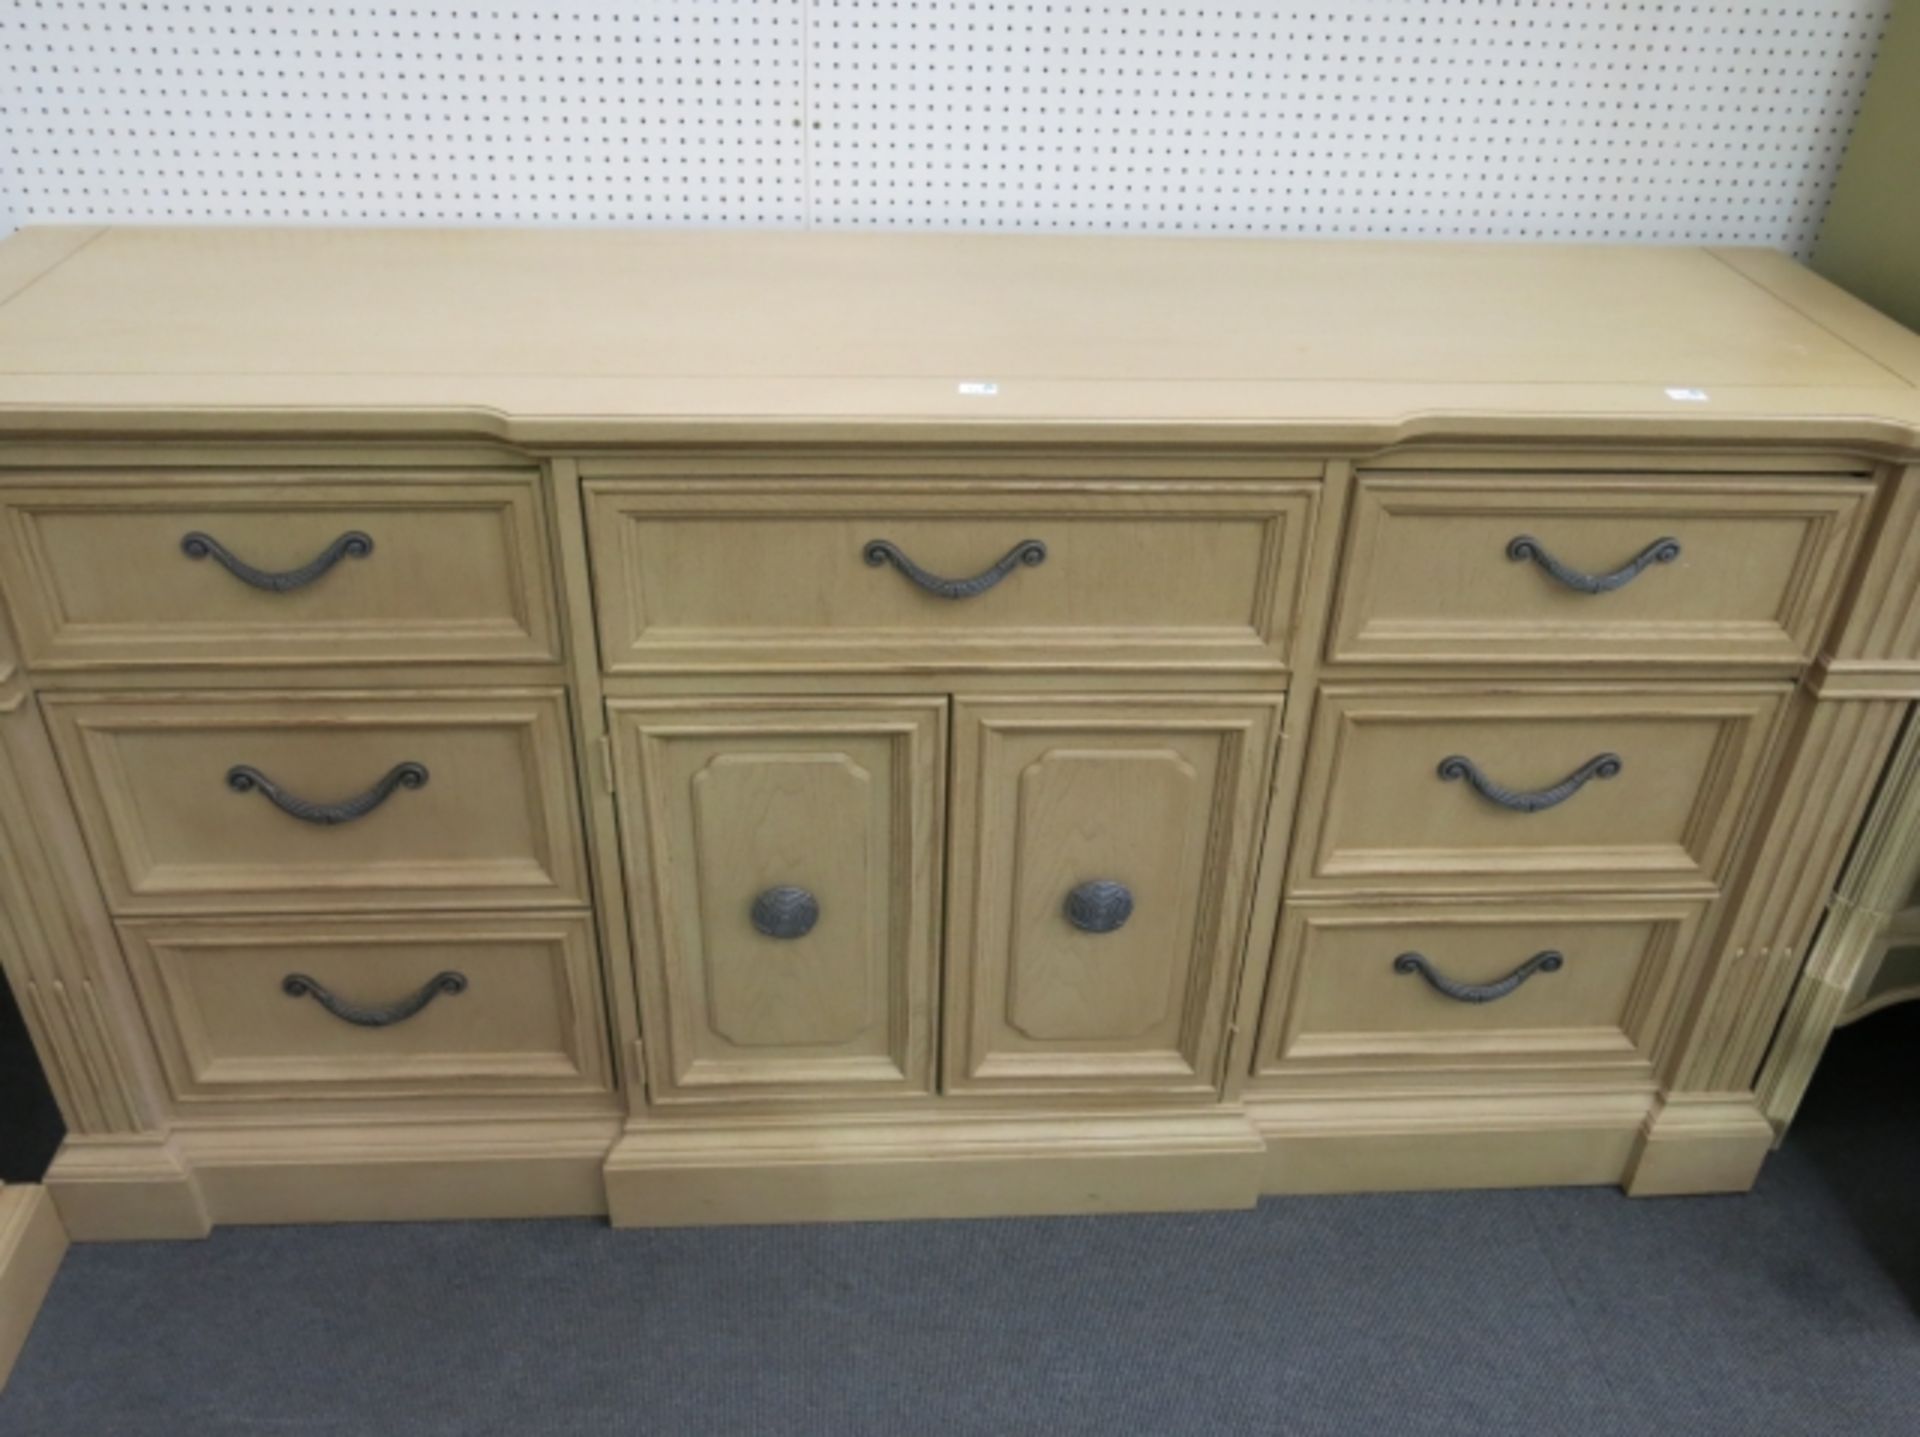 A Three Piece Bedroom Set from Stanley Furniture (Stanley Town, VA, USA). Large Bedroom Unit